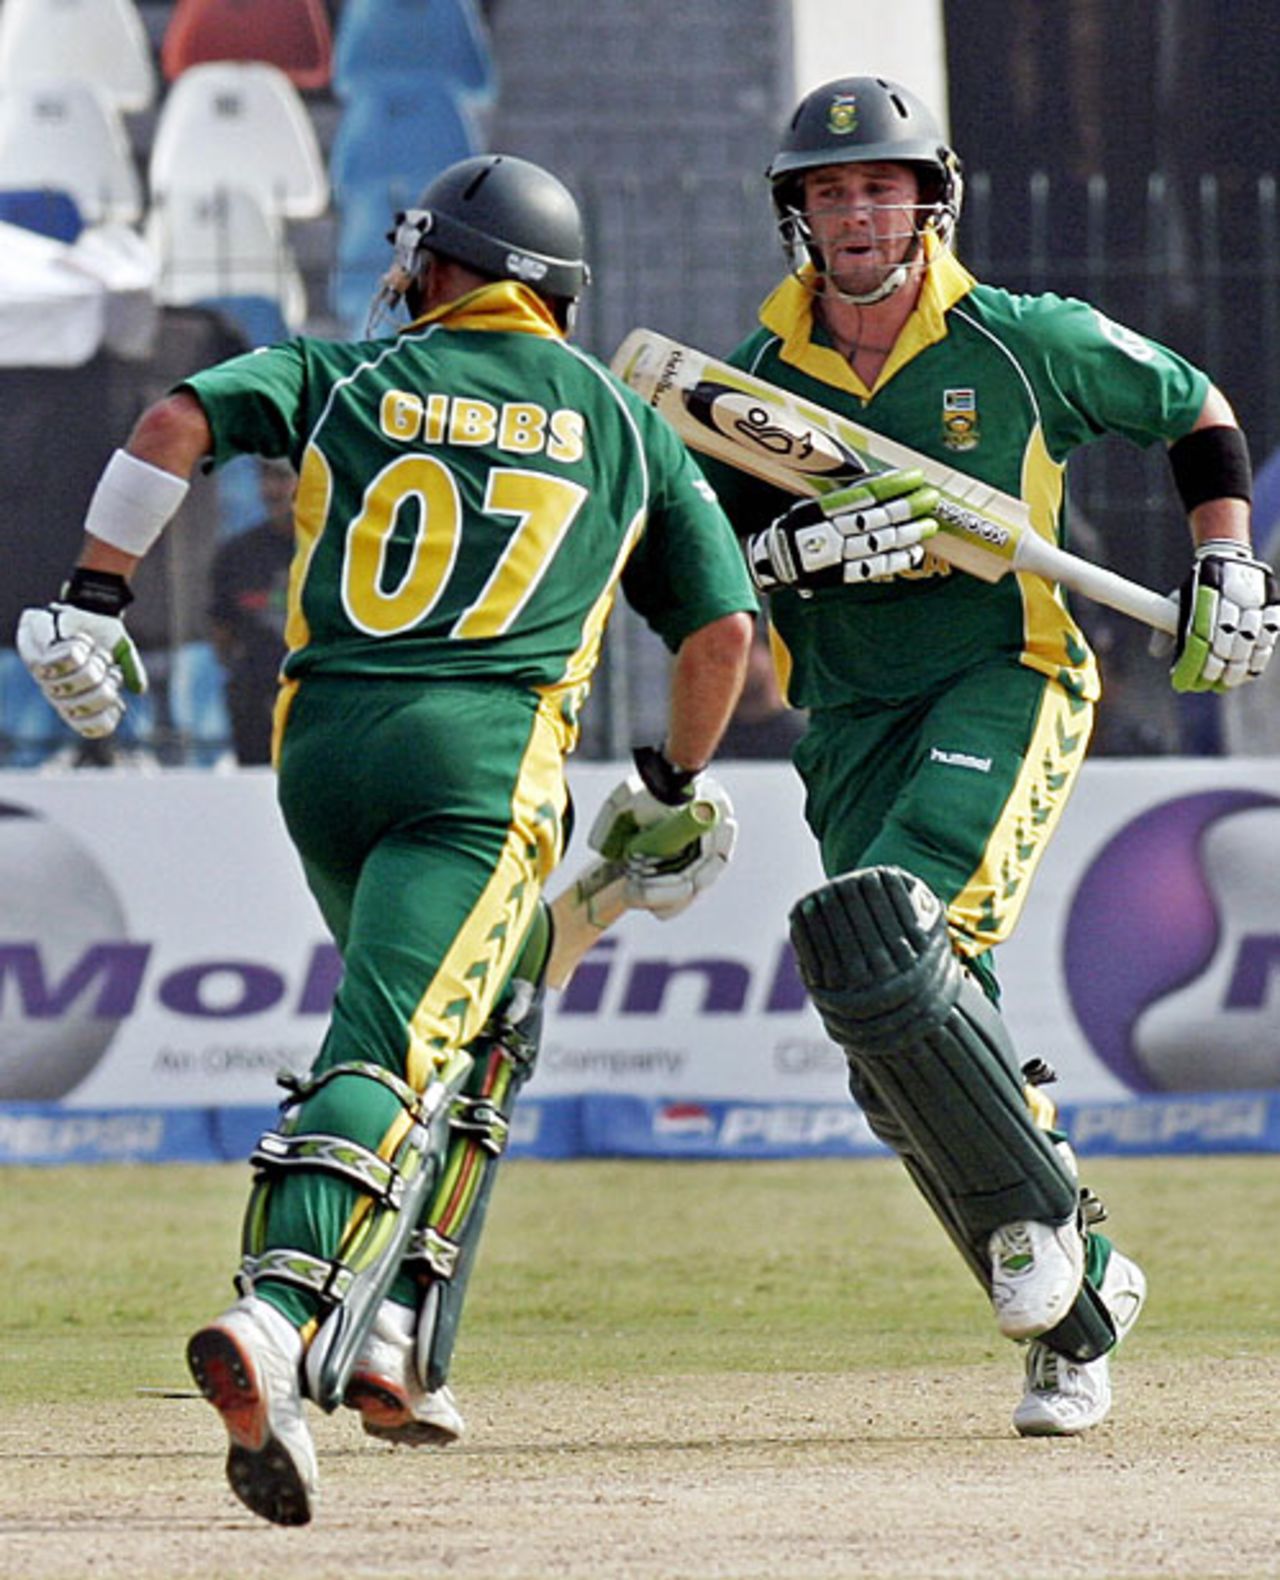 Herschelle Gibbs and AB de Villiers added 137 for the third wicket, Pakistan v South Africa, 1st ODI, Lahore, October 18, 2007